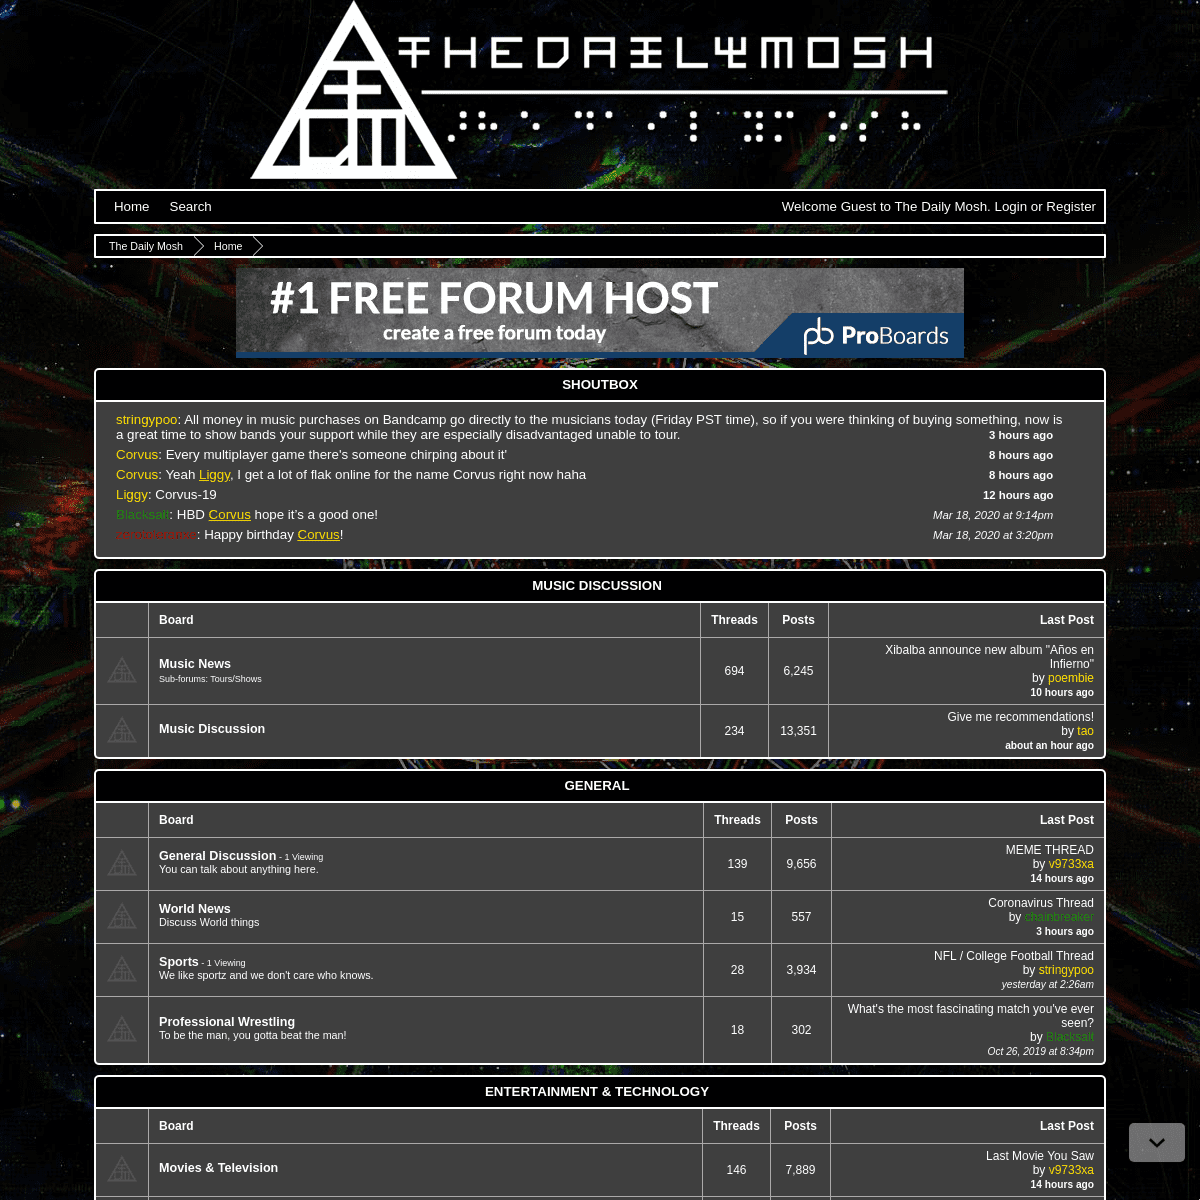 A complete backup of thedailymosh.com